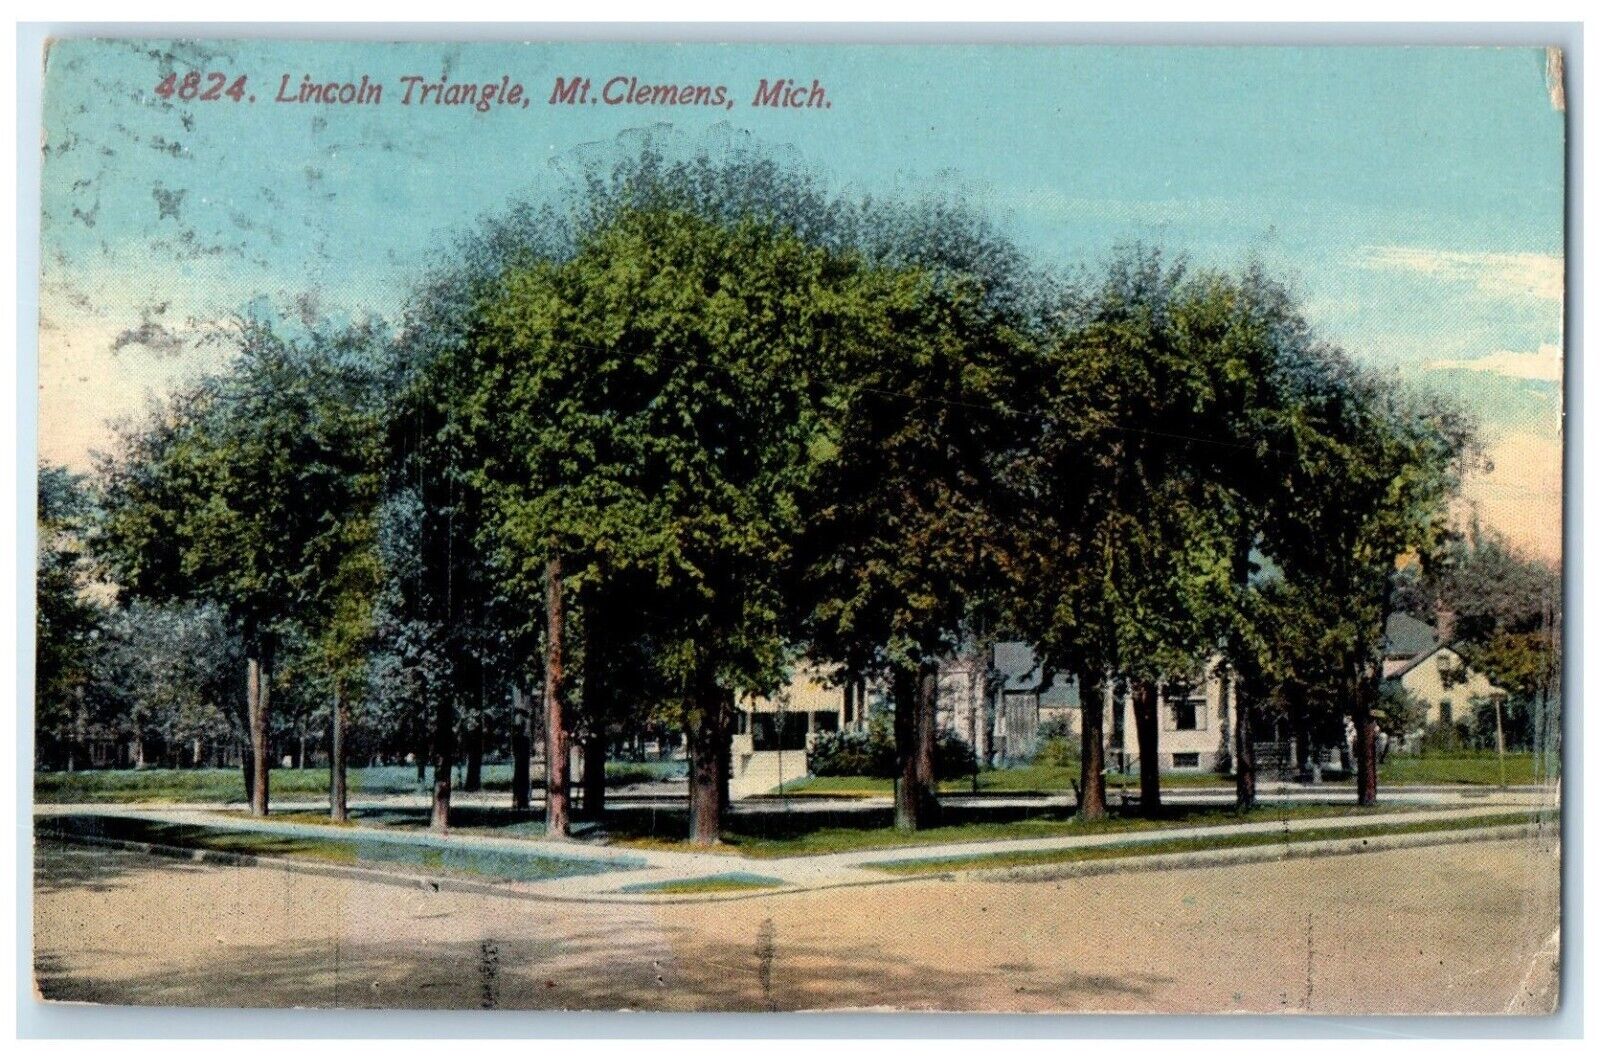 1914 Scenic View Lincoln Triangle Mt Clemens Michigan Antique Vintage Postcard